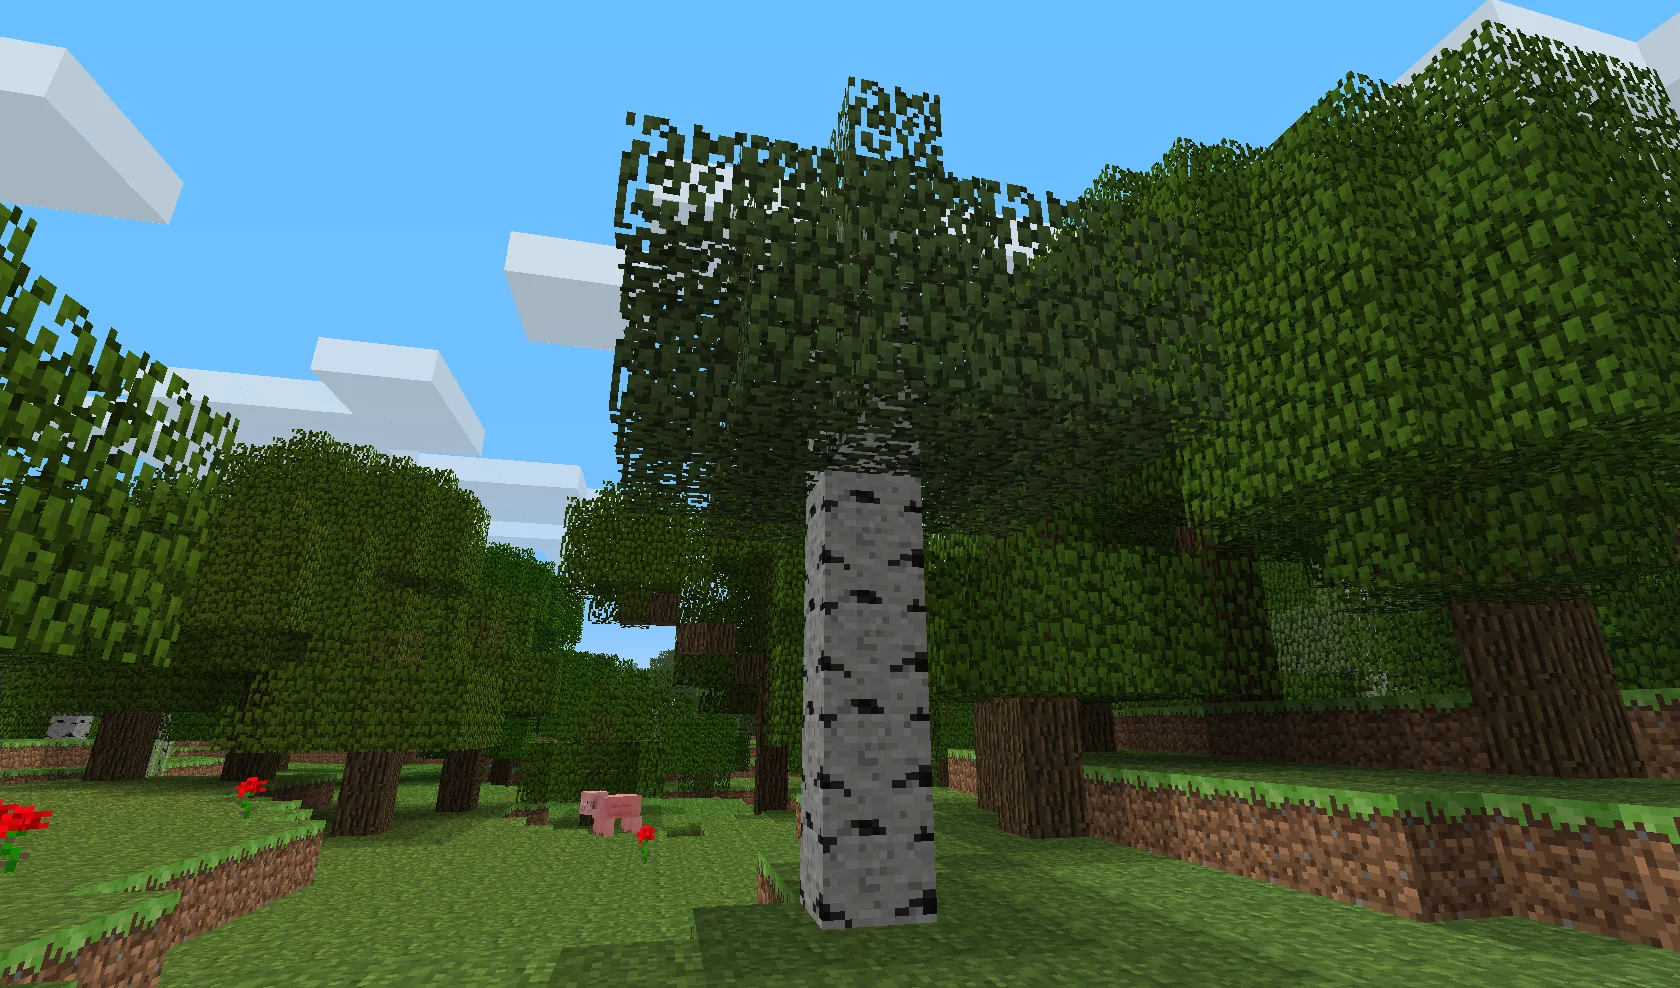 Cubic trees began to be brought to the set of the Minecraft film adaptation